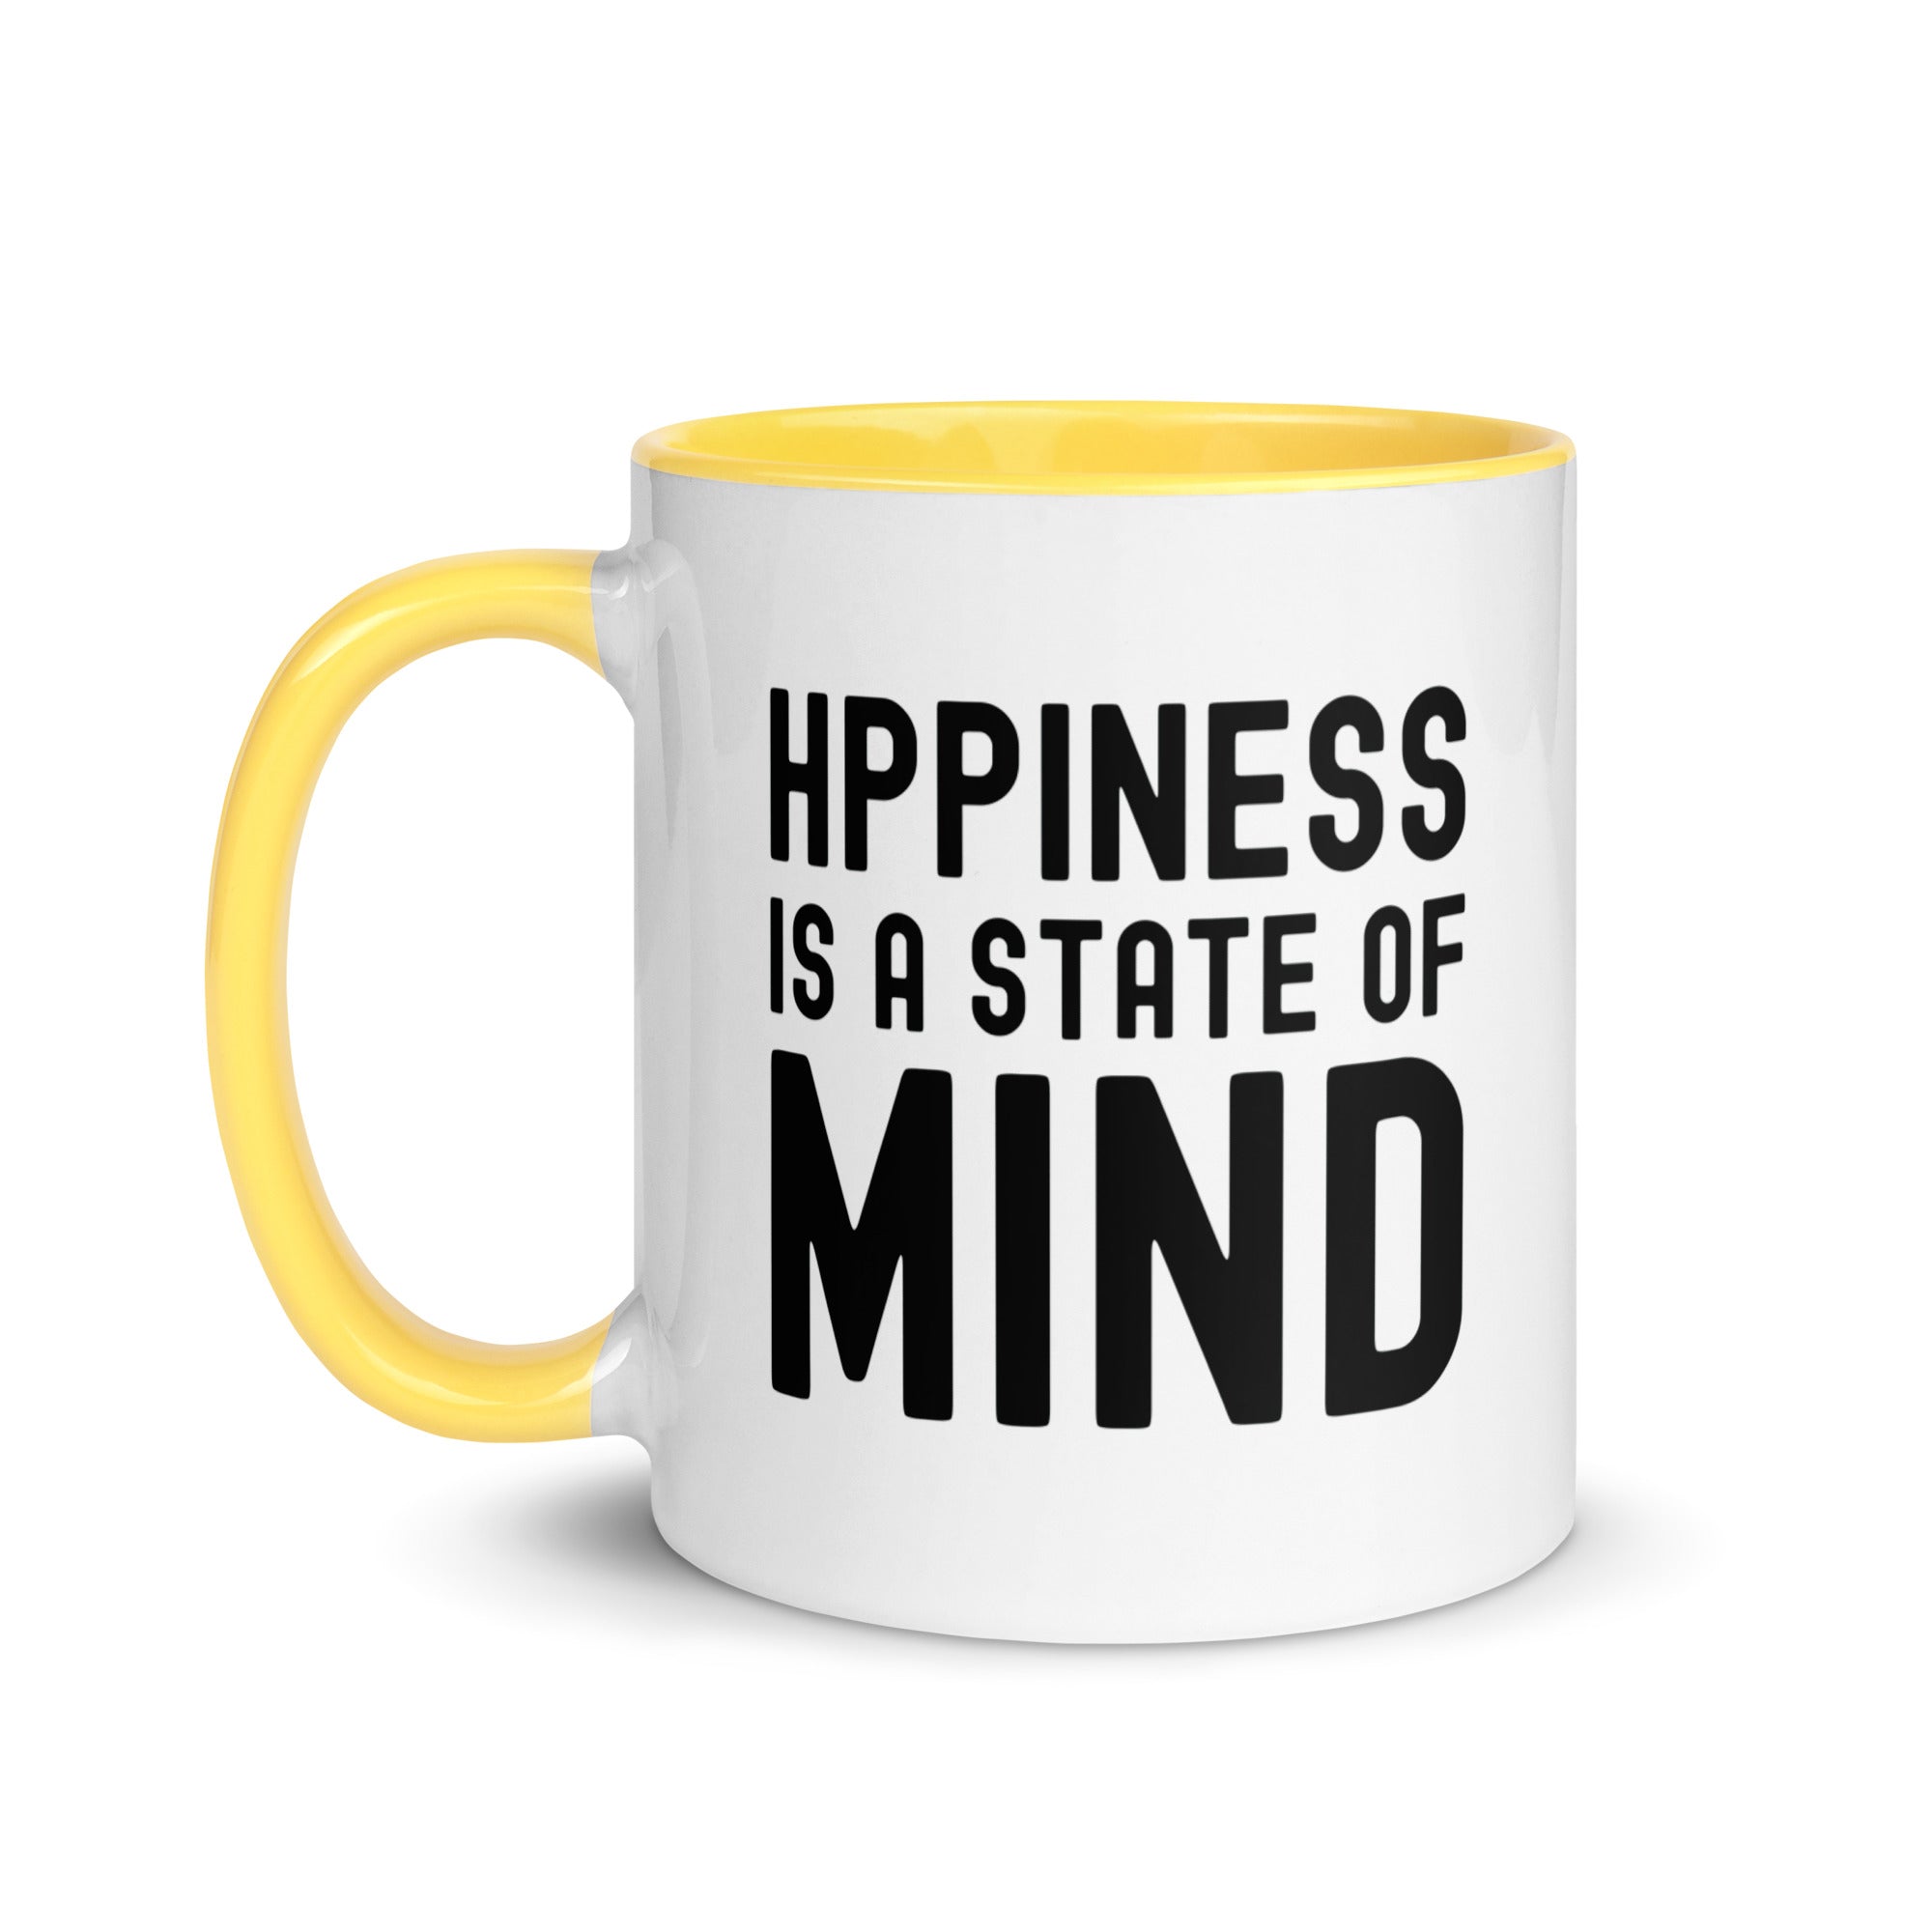 Mug with Color Inside | Hppiness is a state of mind